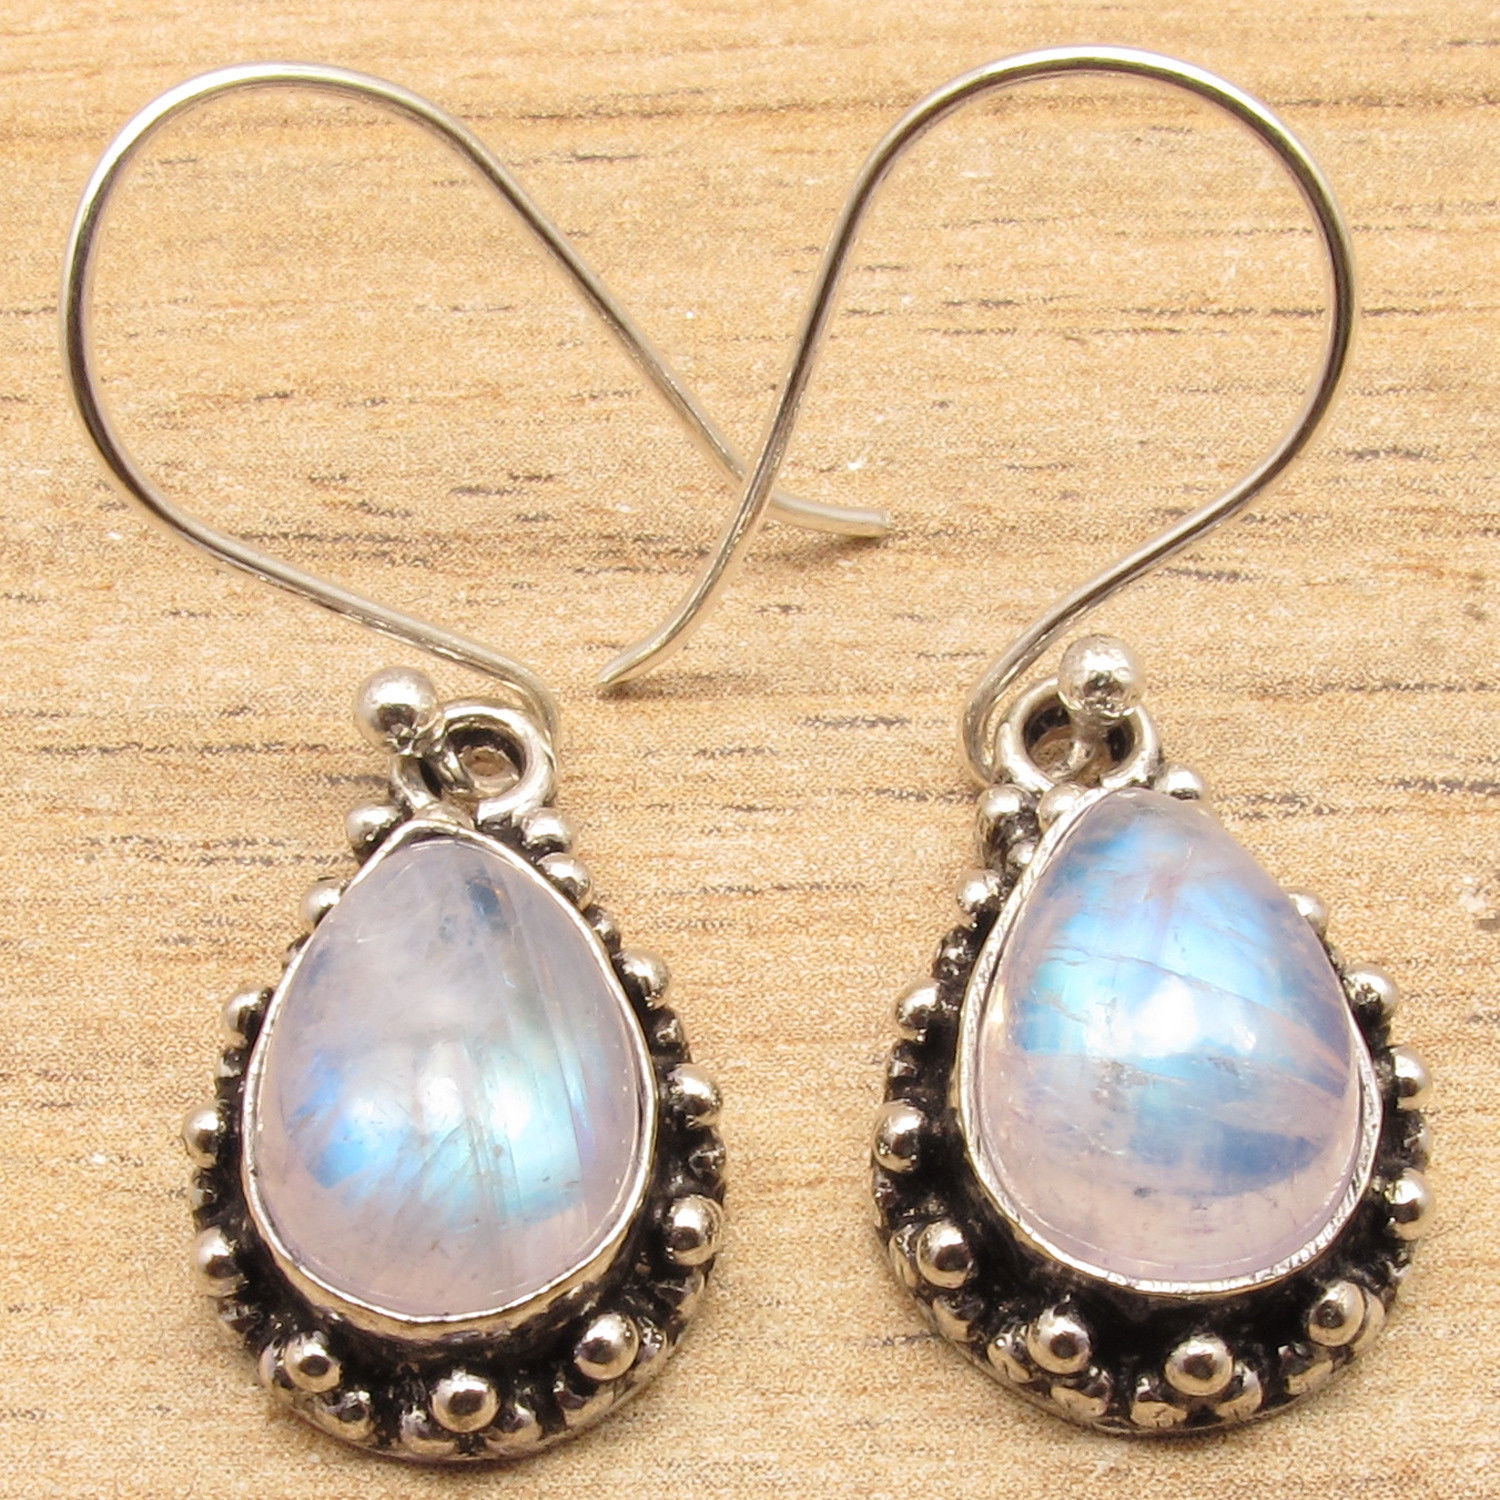 Buy moonstone jewel and get free shipping on AliExpress.com